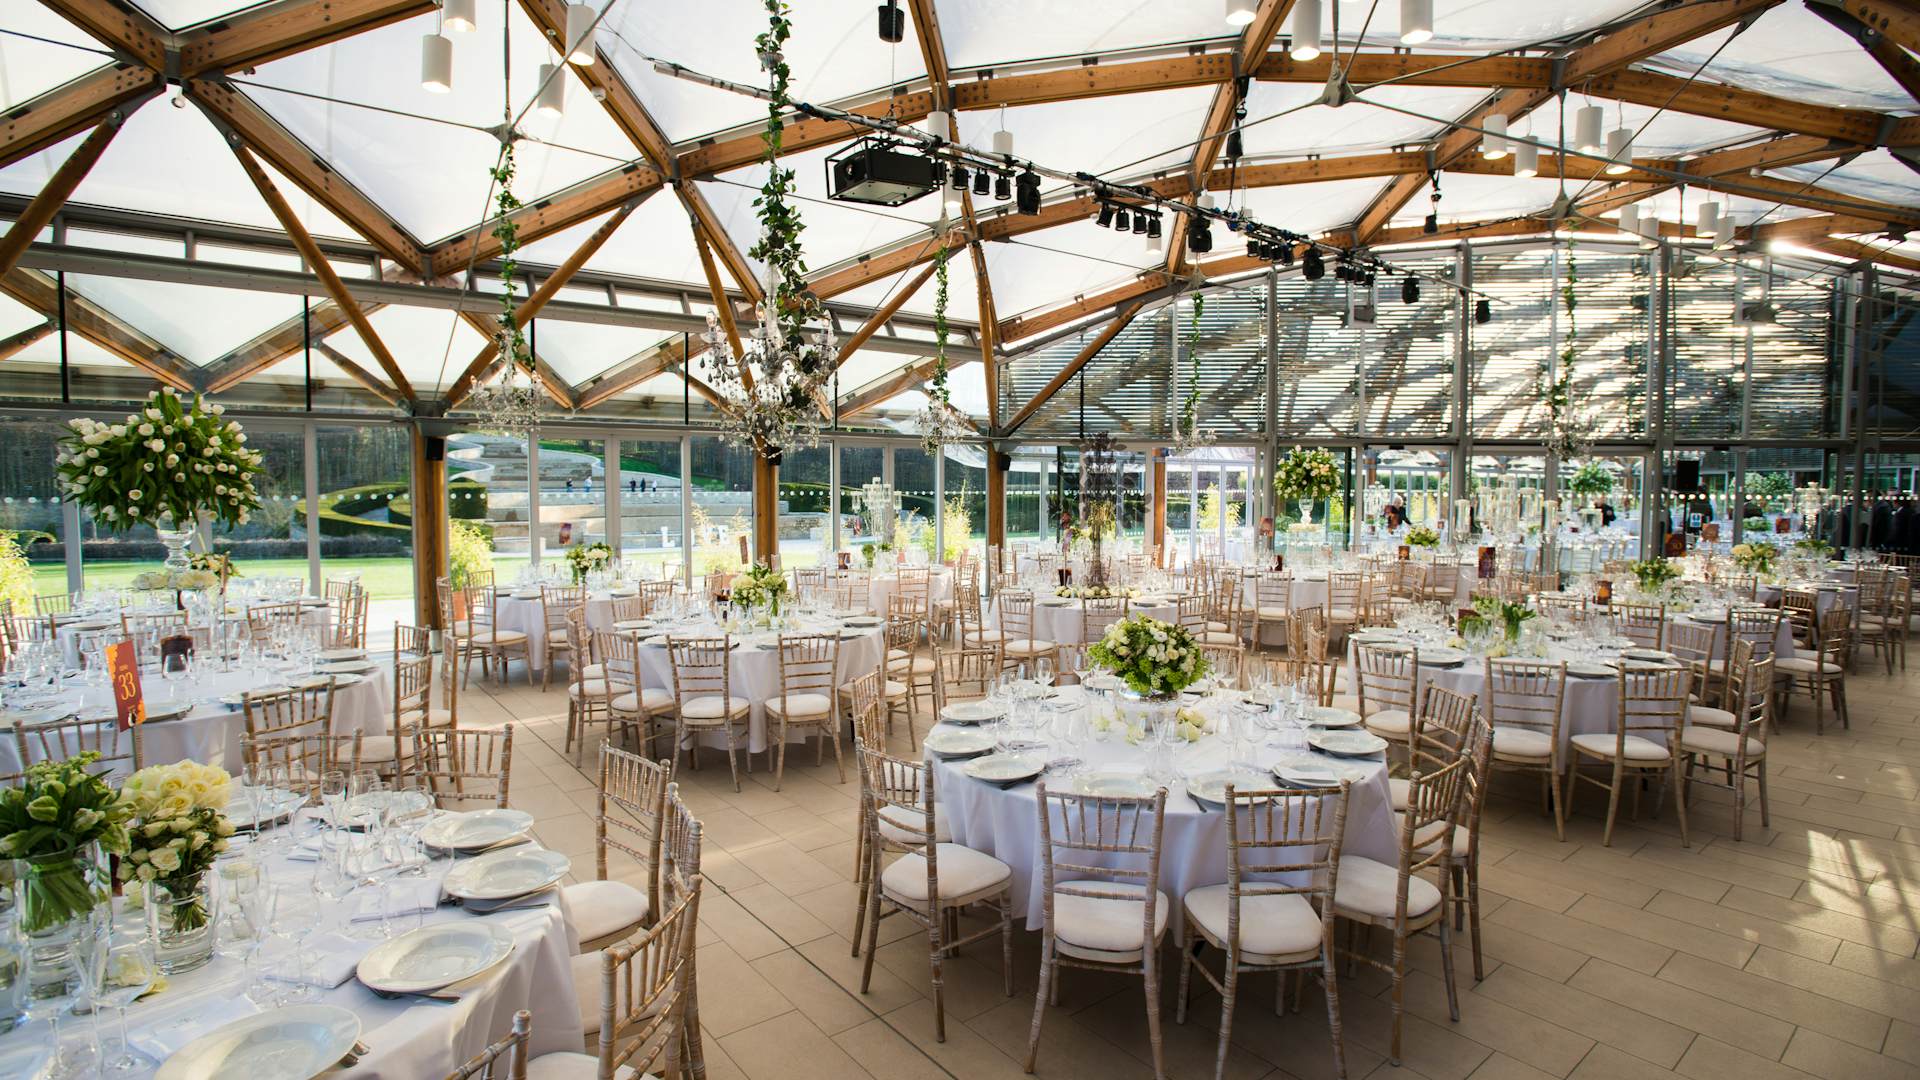 The Pavilion Room Weddings The Pavilion At The Alnwick Garden